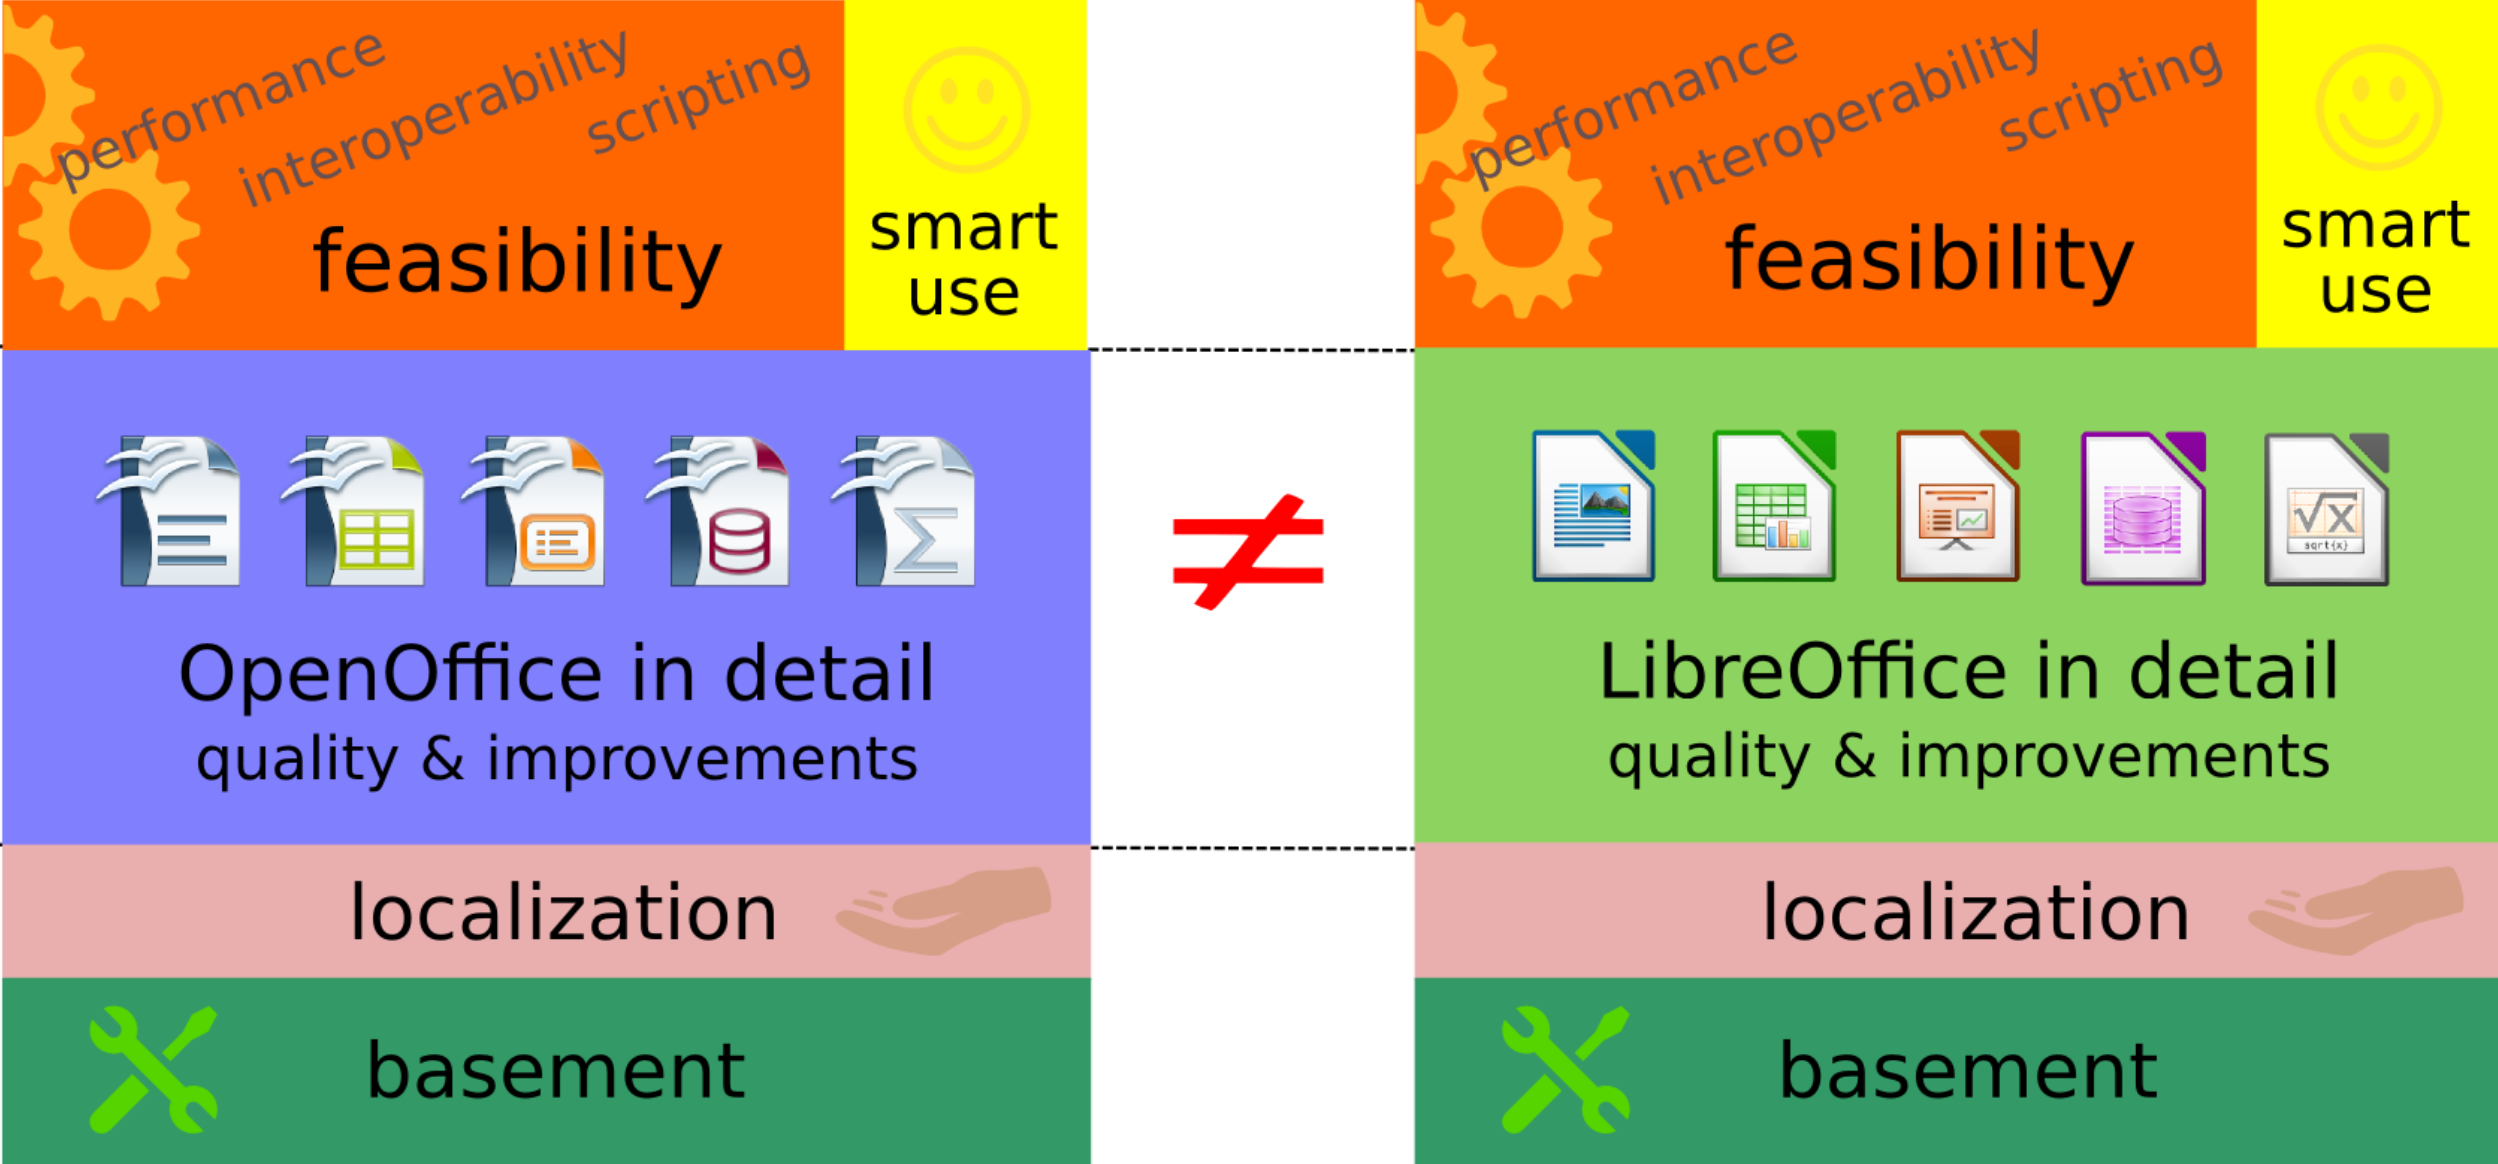 Comparing LibreOffice and Apache OpenOffice: functional model